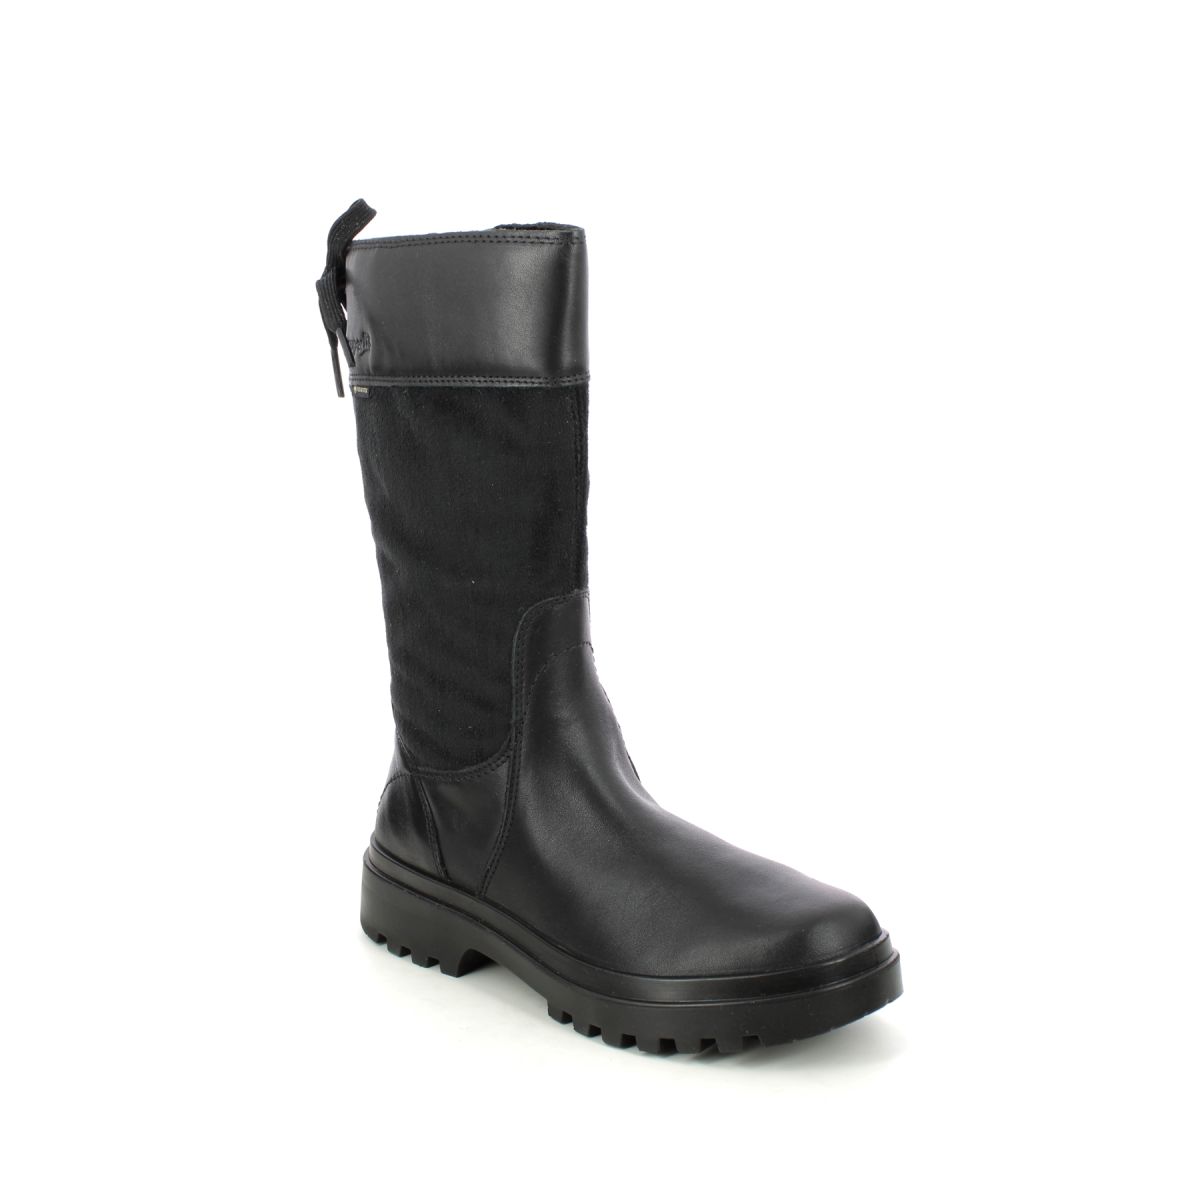 Superfit Abby Long Gtx Black Leather Kids Girls Boots 1000605-0000 In Size 33 In Plain Black Leather For kids